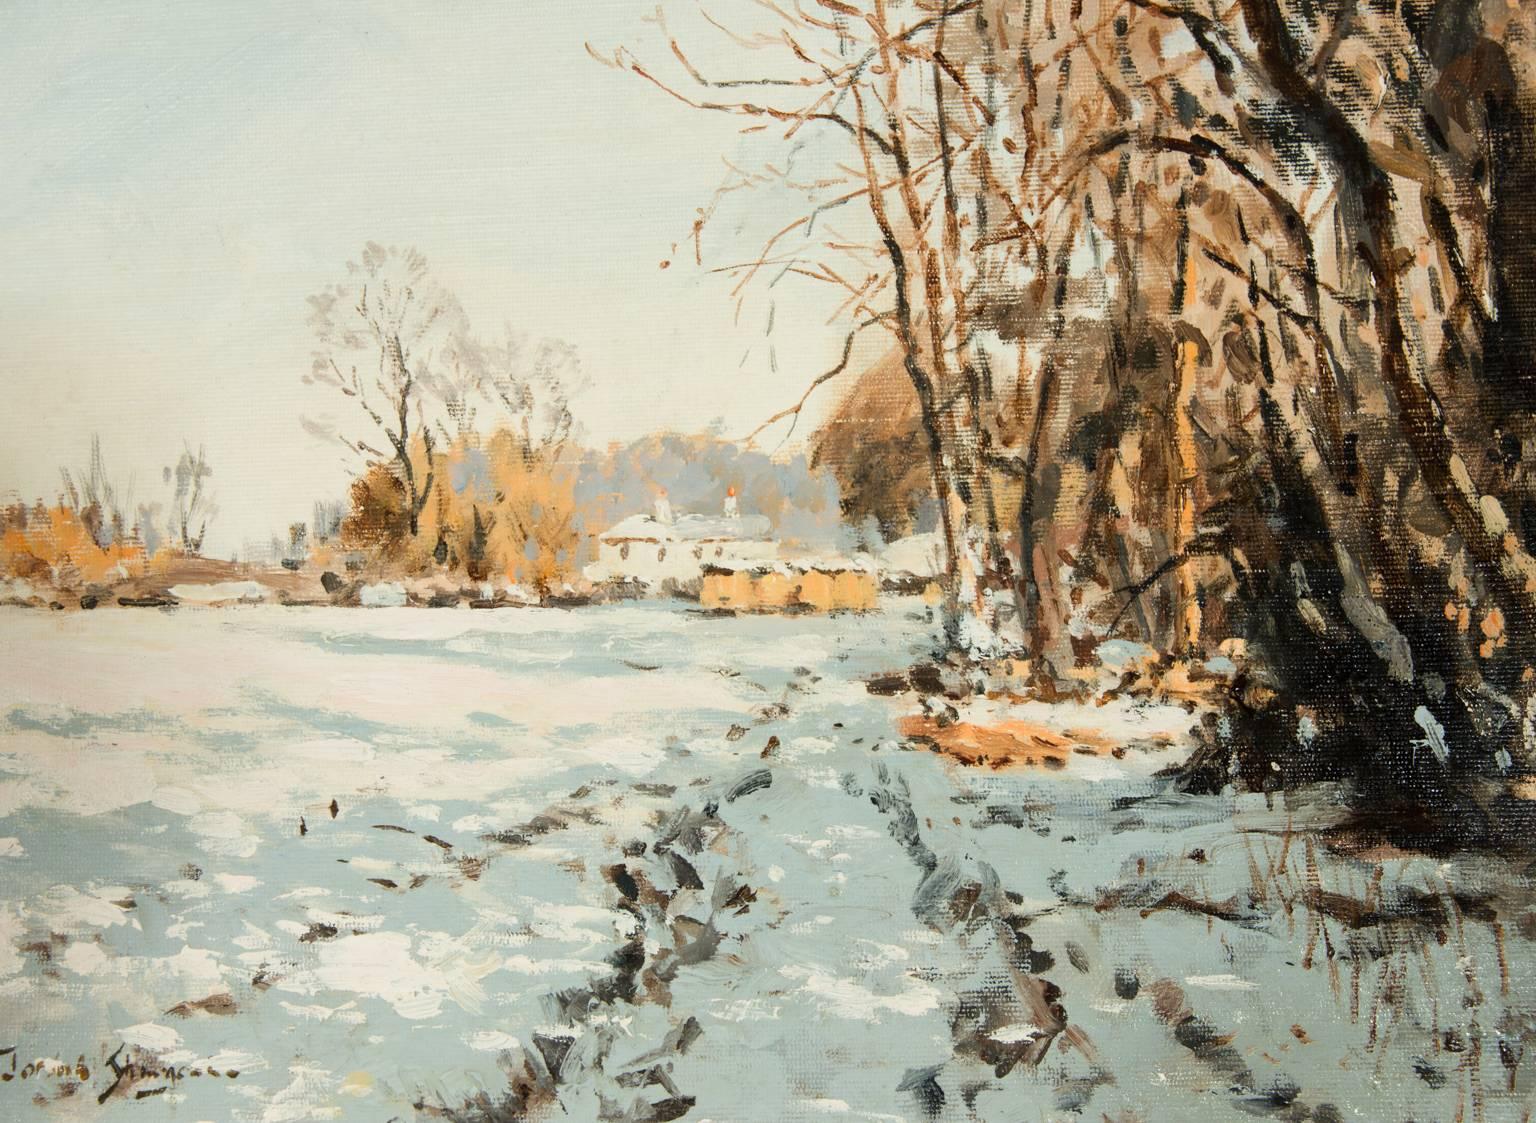 A fine impressionistic wintry landscape by Josiah Sturgeon (1918-2000), signed by the artist in the lower left. Depicting the National Trust Property, Polesden Lacey, in Dorking. This painting was the title picture for the artist's Exhibition of